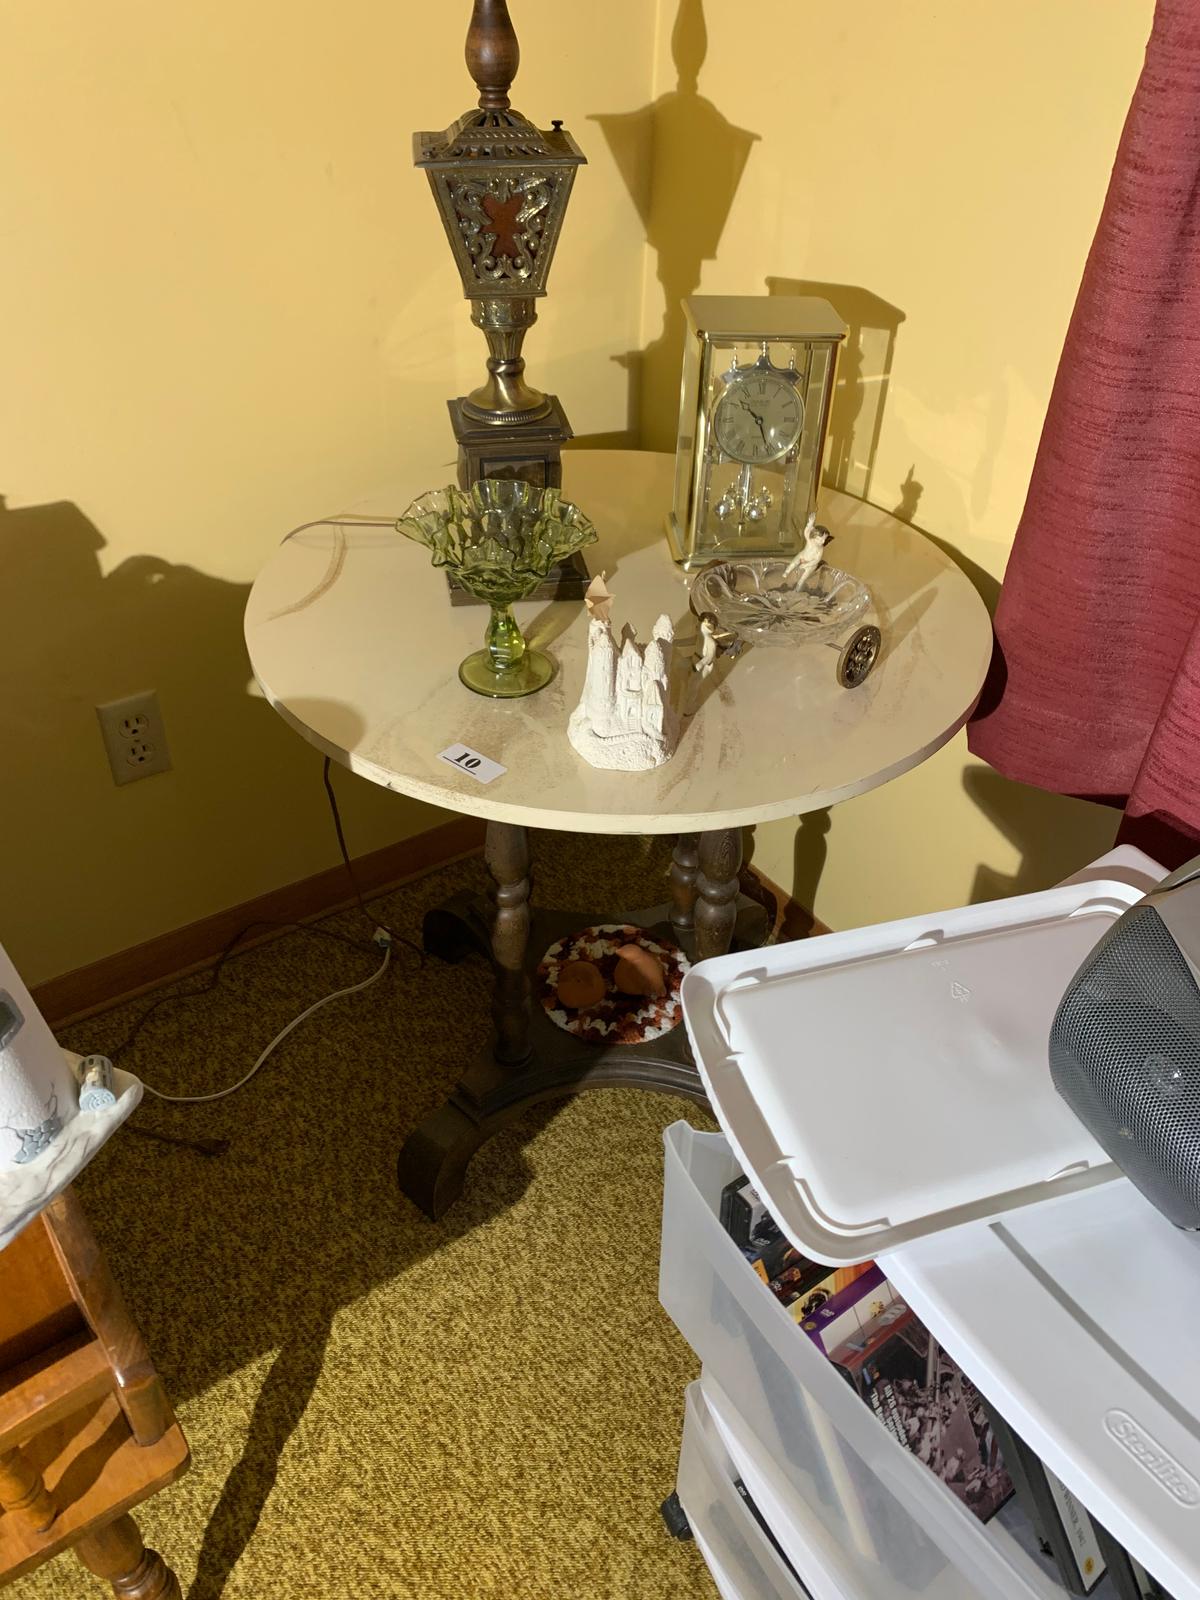 Vintage Table with marble or stone top